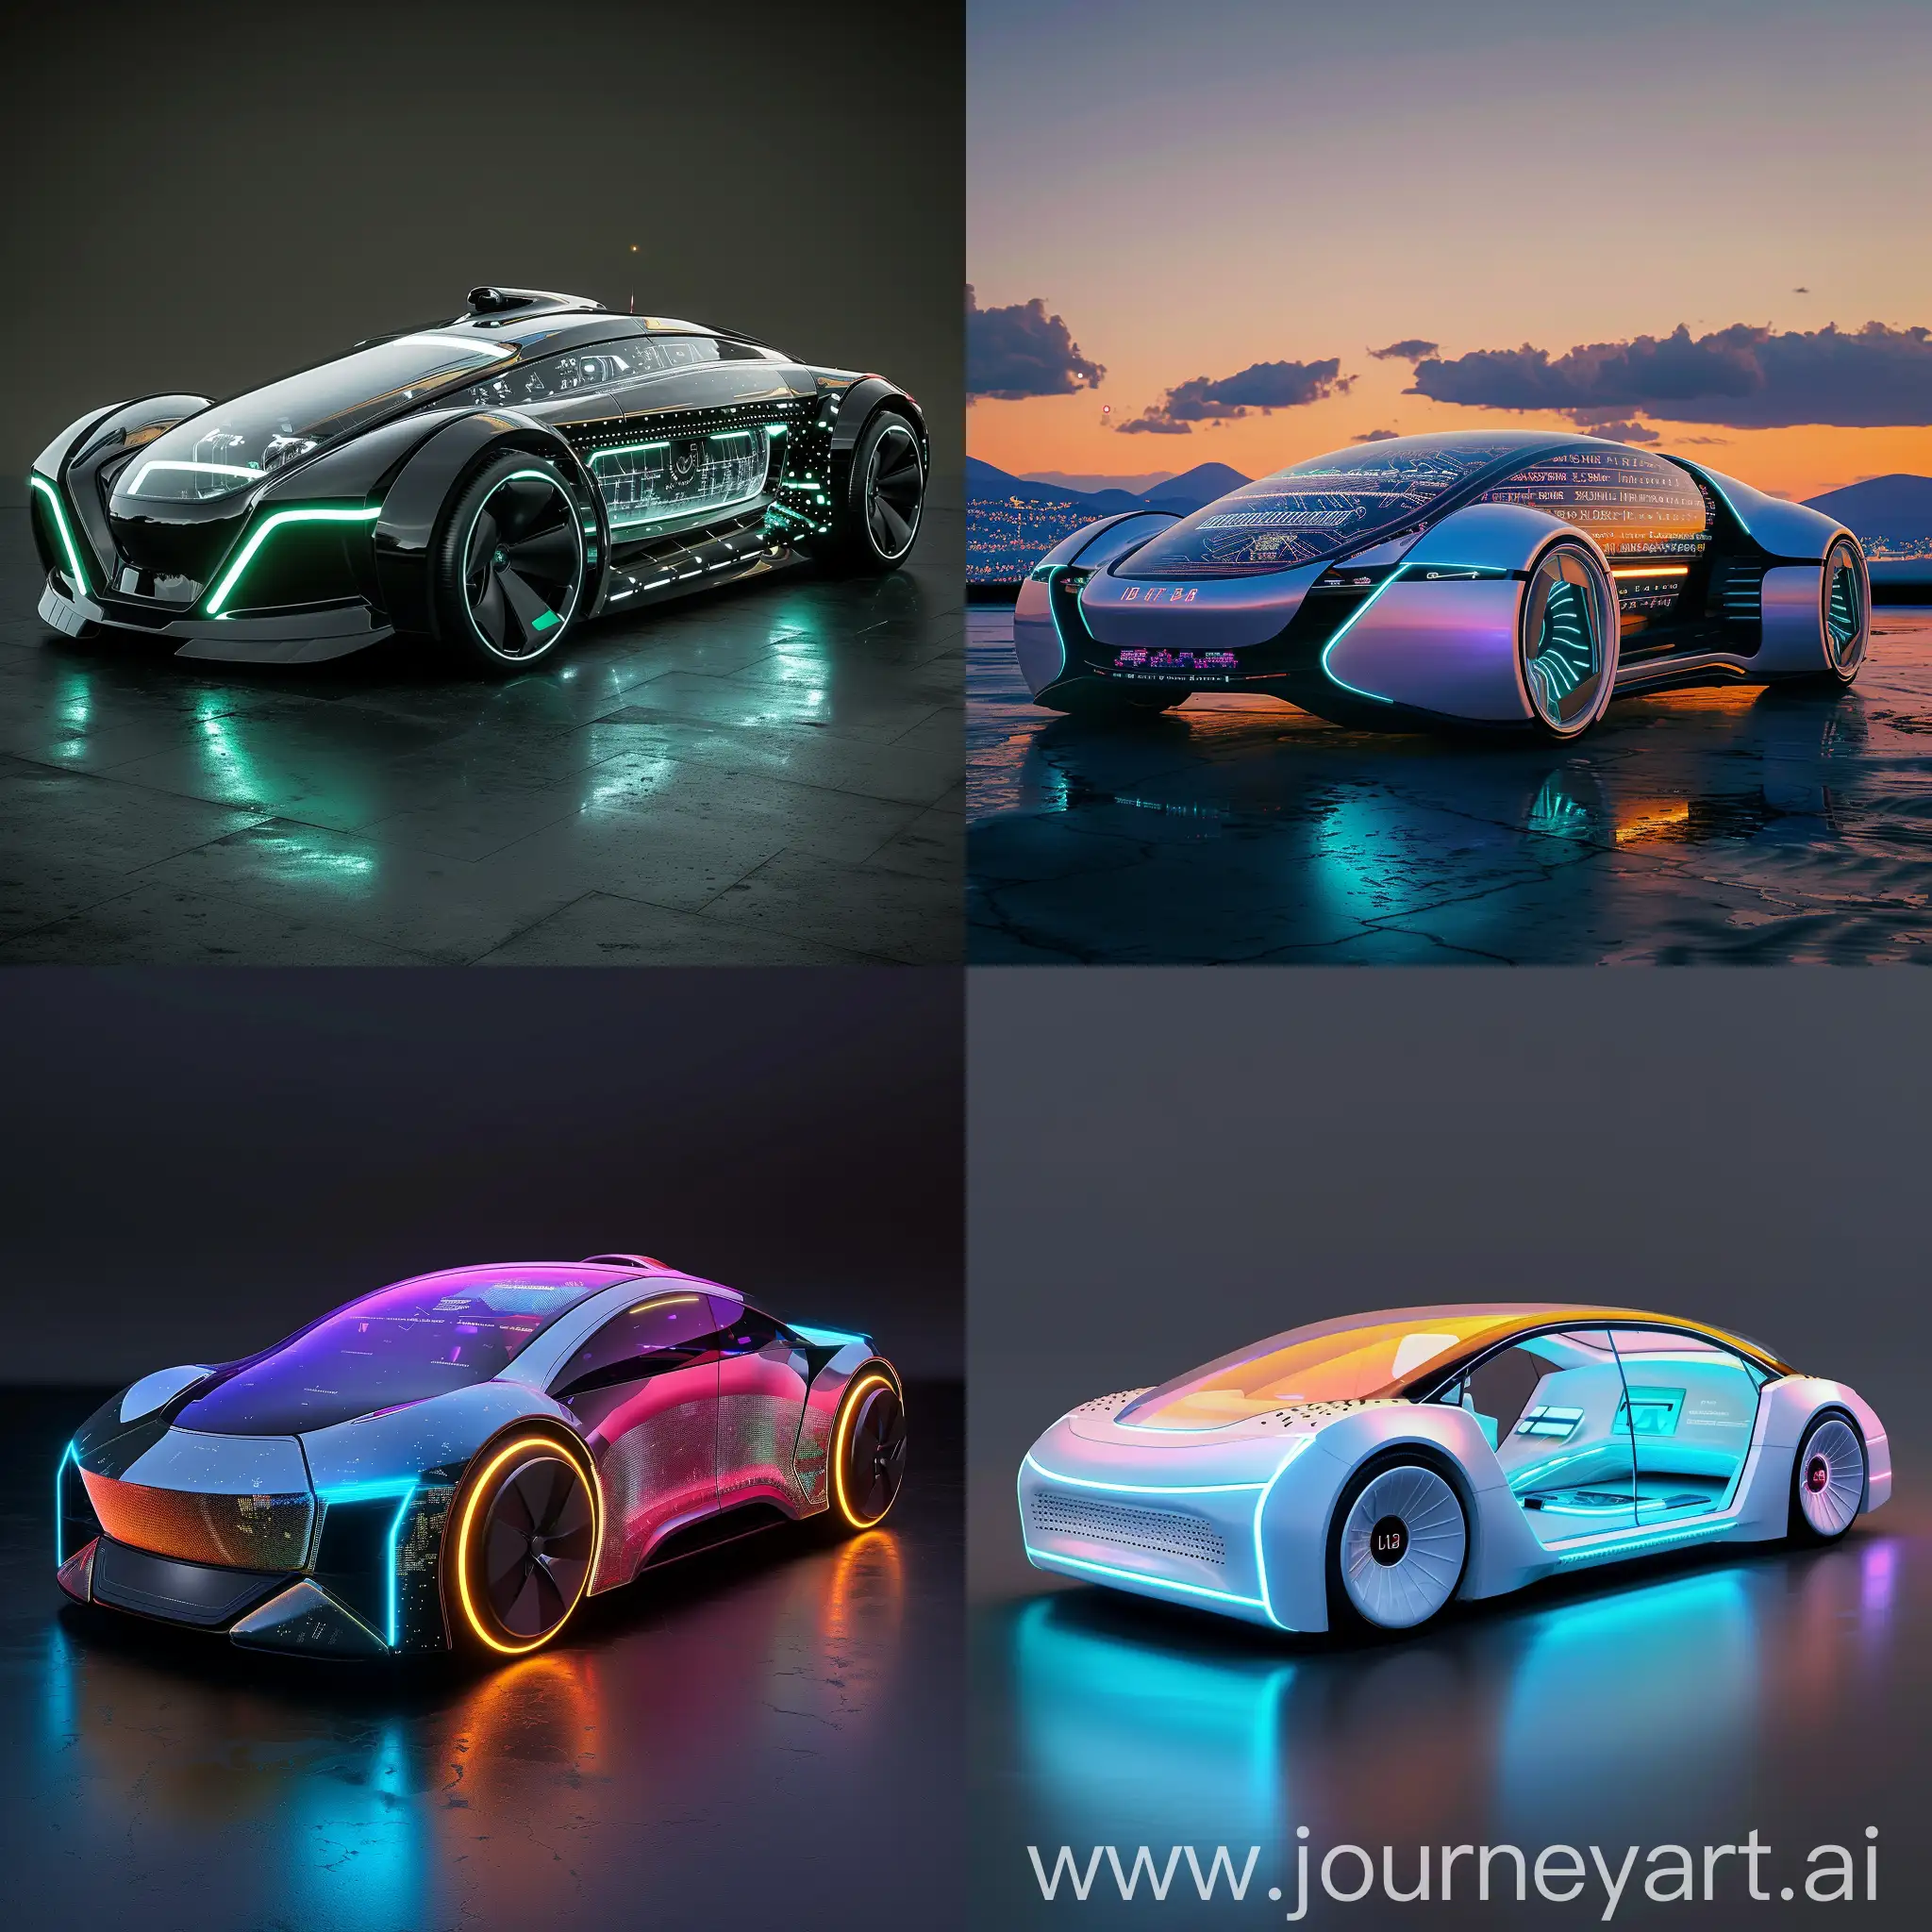 Futuristic car, in futuristic style, Advanced Driver Assistance Systems (ADAS), Augmented Reality (AR) Head-Up Display, Artificial Intelligence (AI) Integration, 360-Degree Surround View Cameras, Biometric Authentication, Haptic Feedback Controls, Advanced Infotainment System, Smart Glass Windows, Wireless Charging Pads, Connected Car Technology, Adaptive LED and Laser Headlights, Electrochromic Windows, Solar Panels, Advanced Aerodynamics, Smart Paint and Lighting, LIDAR and Radar Sensors, Active Grille Shutters, Self-Healing Coatings, Digital Side Mirrors, Wireless Charging Compatibility, Carbon Fiber Reinforced Polymer (CFRP) Panels, Magnesium Alloy Structures, 3D-Printed Components, Aluminum Foam Materials, Minimalist Seat Design, Thin-Film Electronics, Lightweight Sound Insulation, Hybrid Composite Materials, Slim Battery Technology, Lightweight HVAC Systems, Carbon Fiber Body Panels, Aluminum Alloy Frames, Polycarbonate Windows, Magnesium Wheels, Composite Suspension Components, Lightweight Aerodynamic Elements,Advanced Plastic Bumpers, Thin-Film Solar Panels, Titanium Fasteners, Lightweight Paint Coatings, unreal engine 5 --stylize 1000